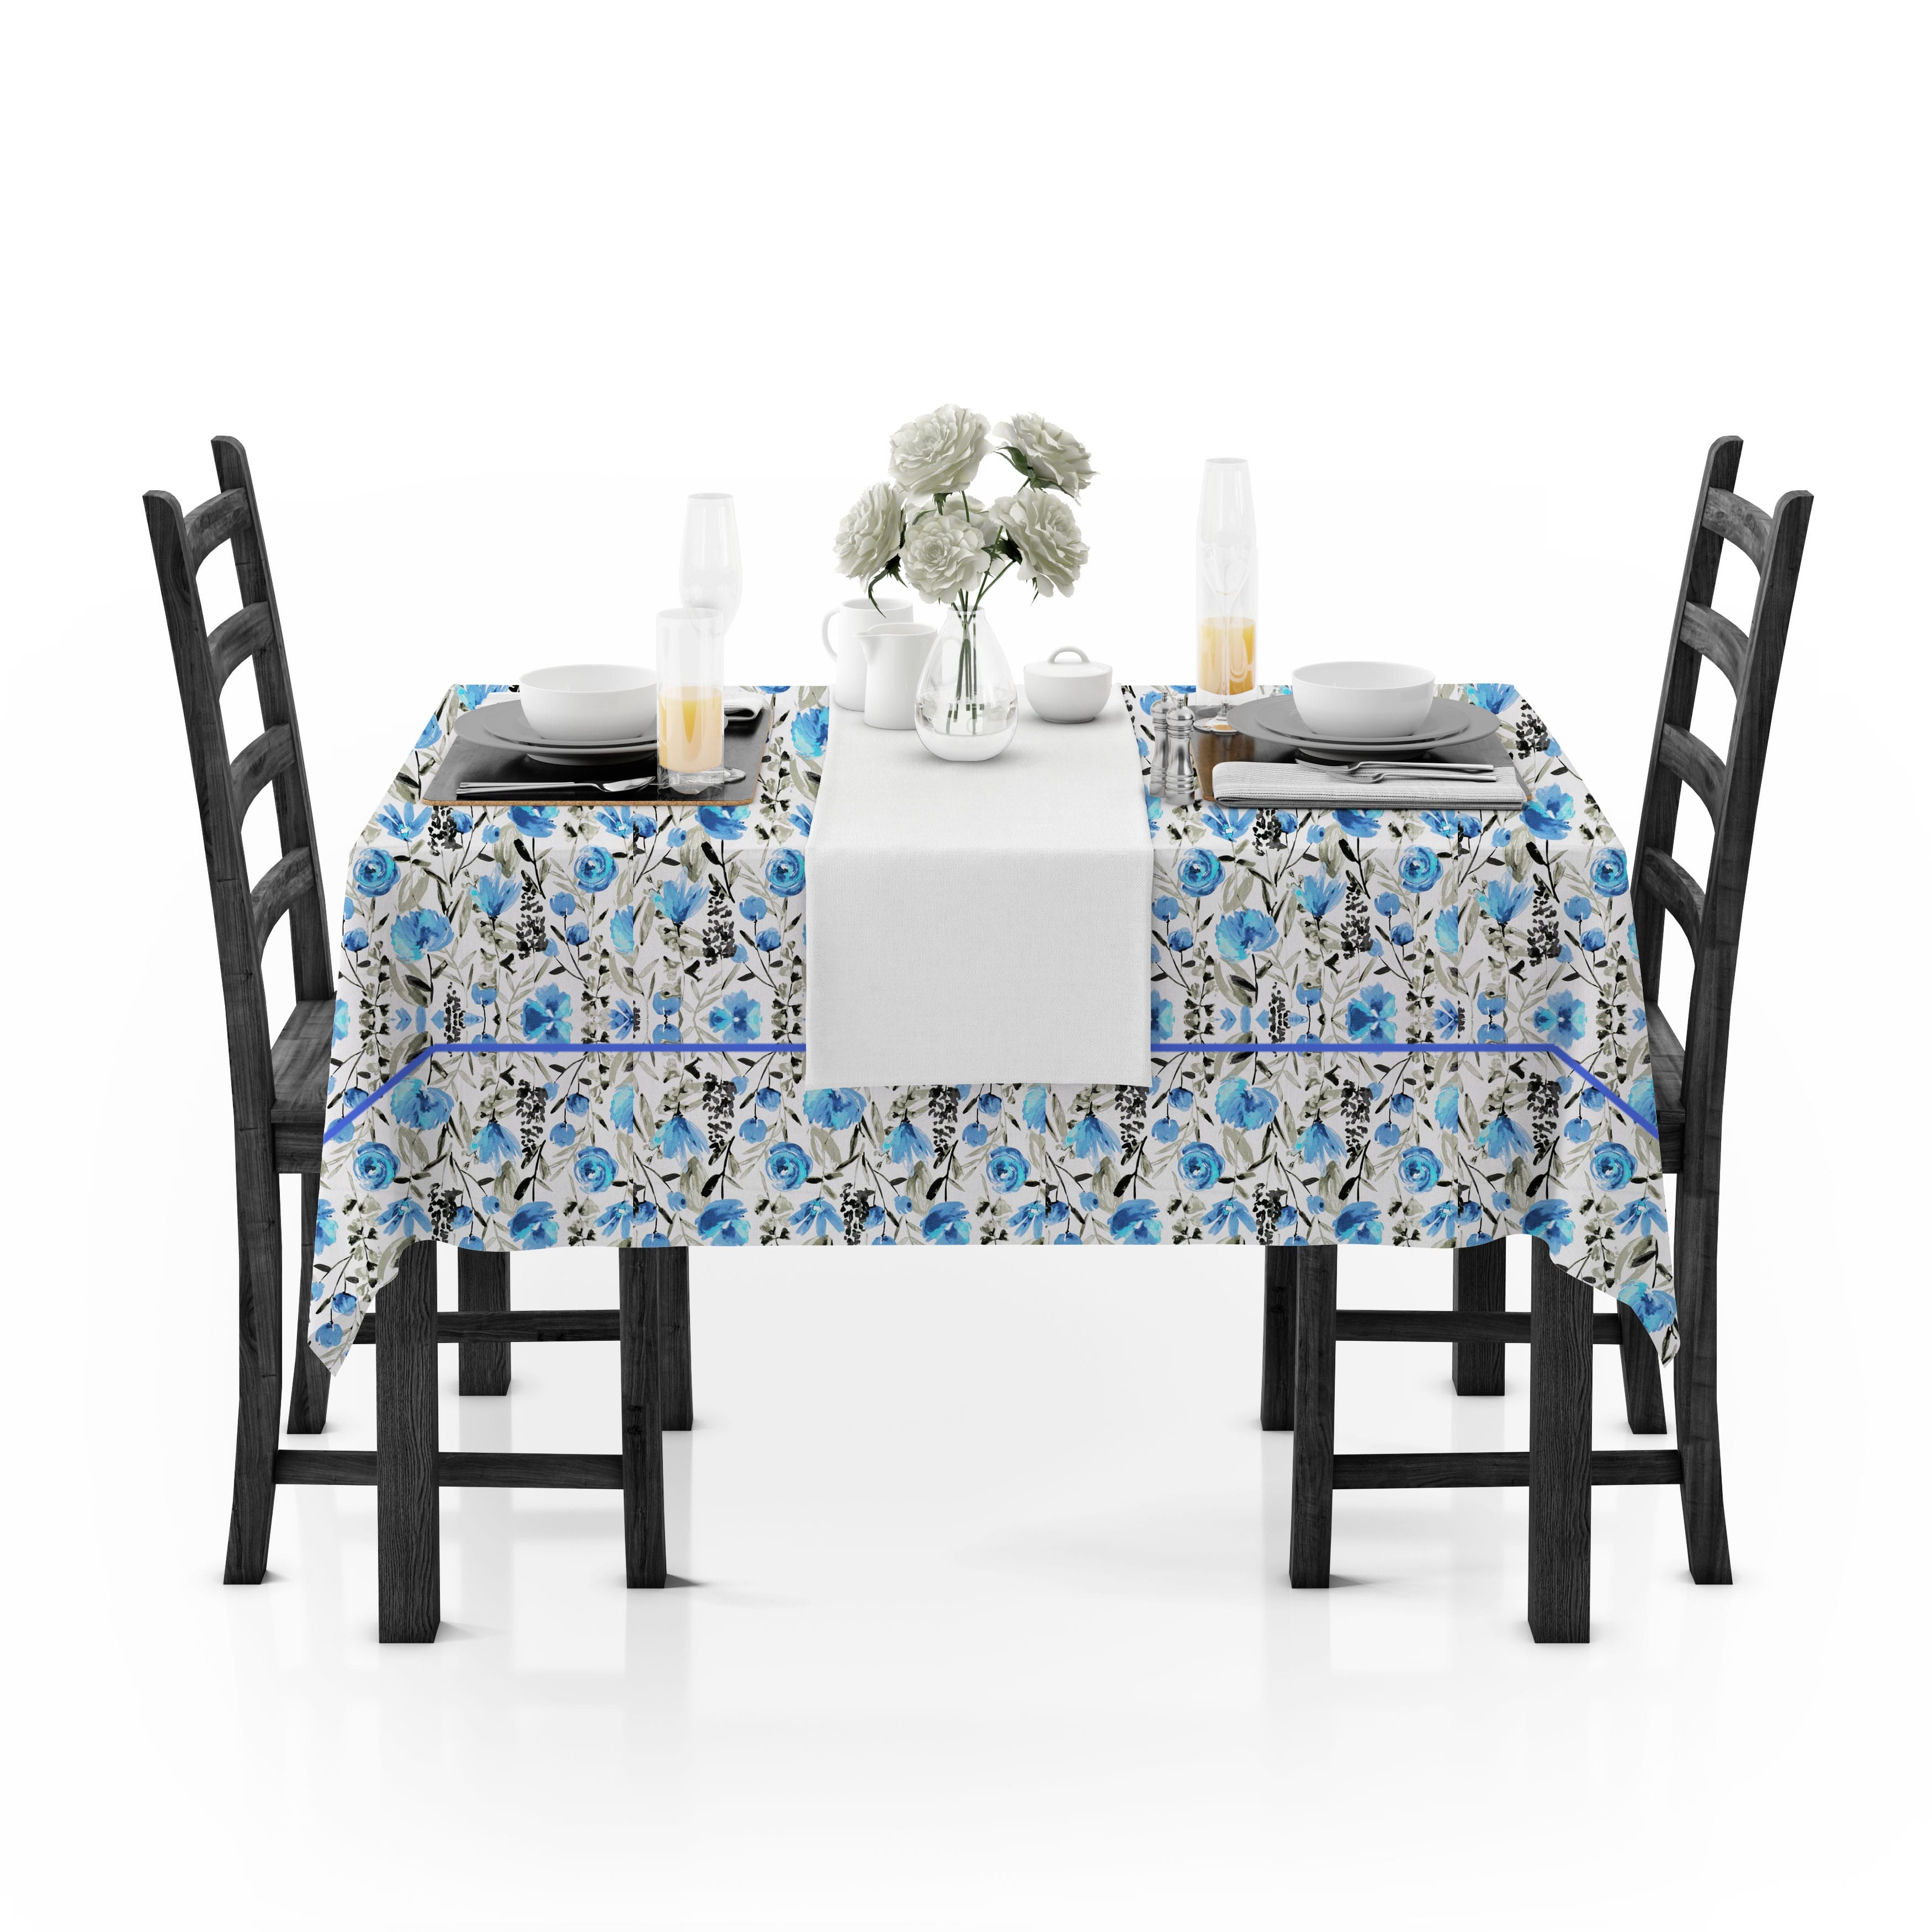 PRISM Printed Cotton Floral 1 Pc Table Cover - Blue